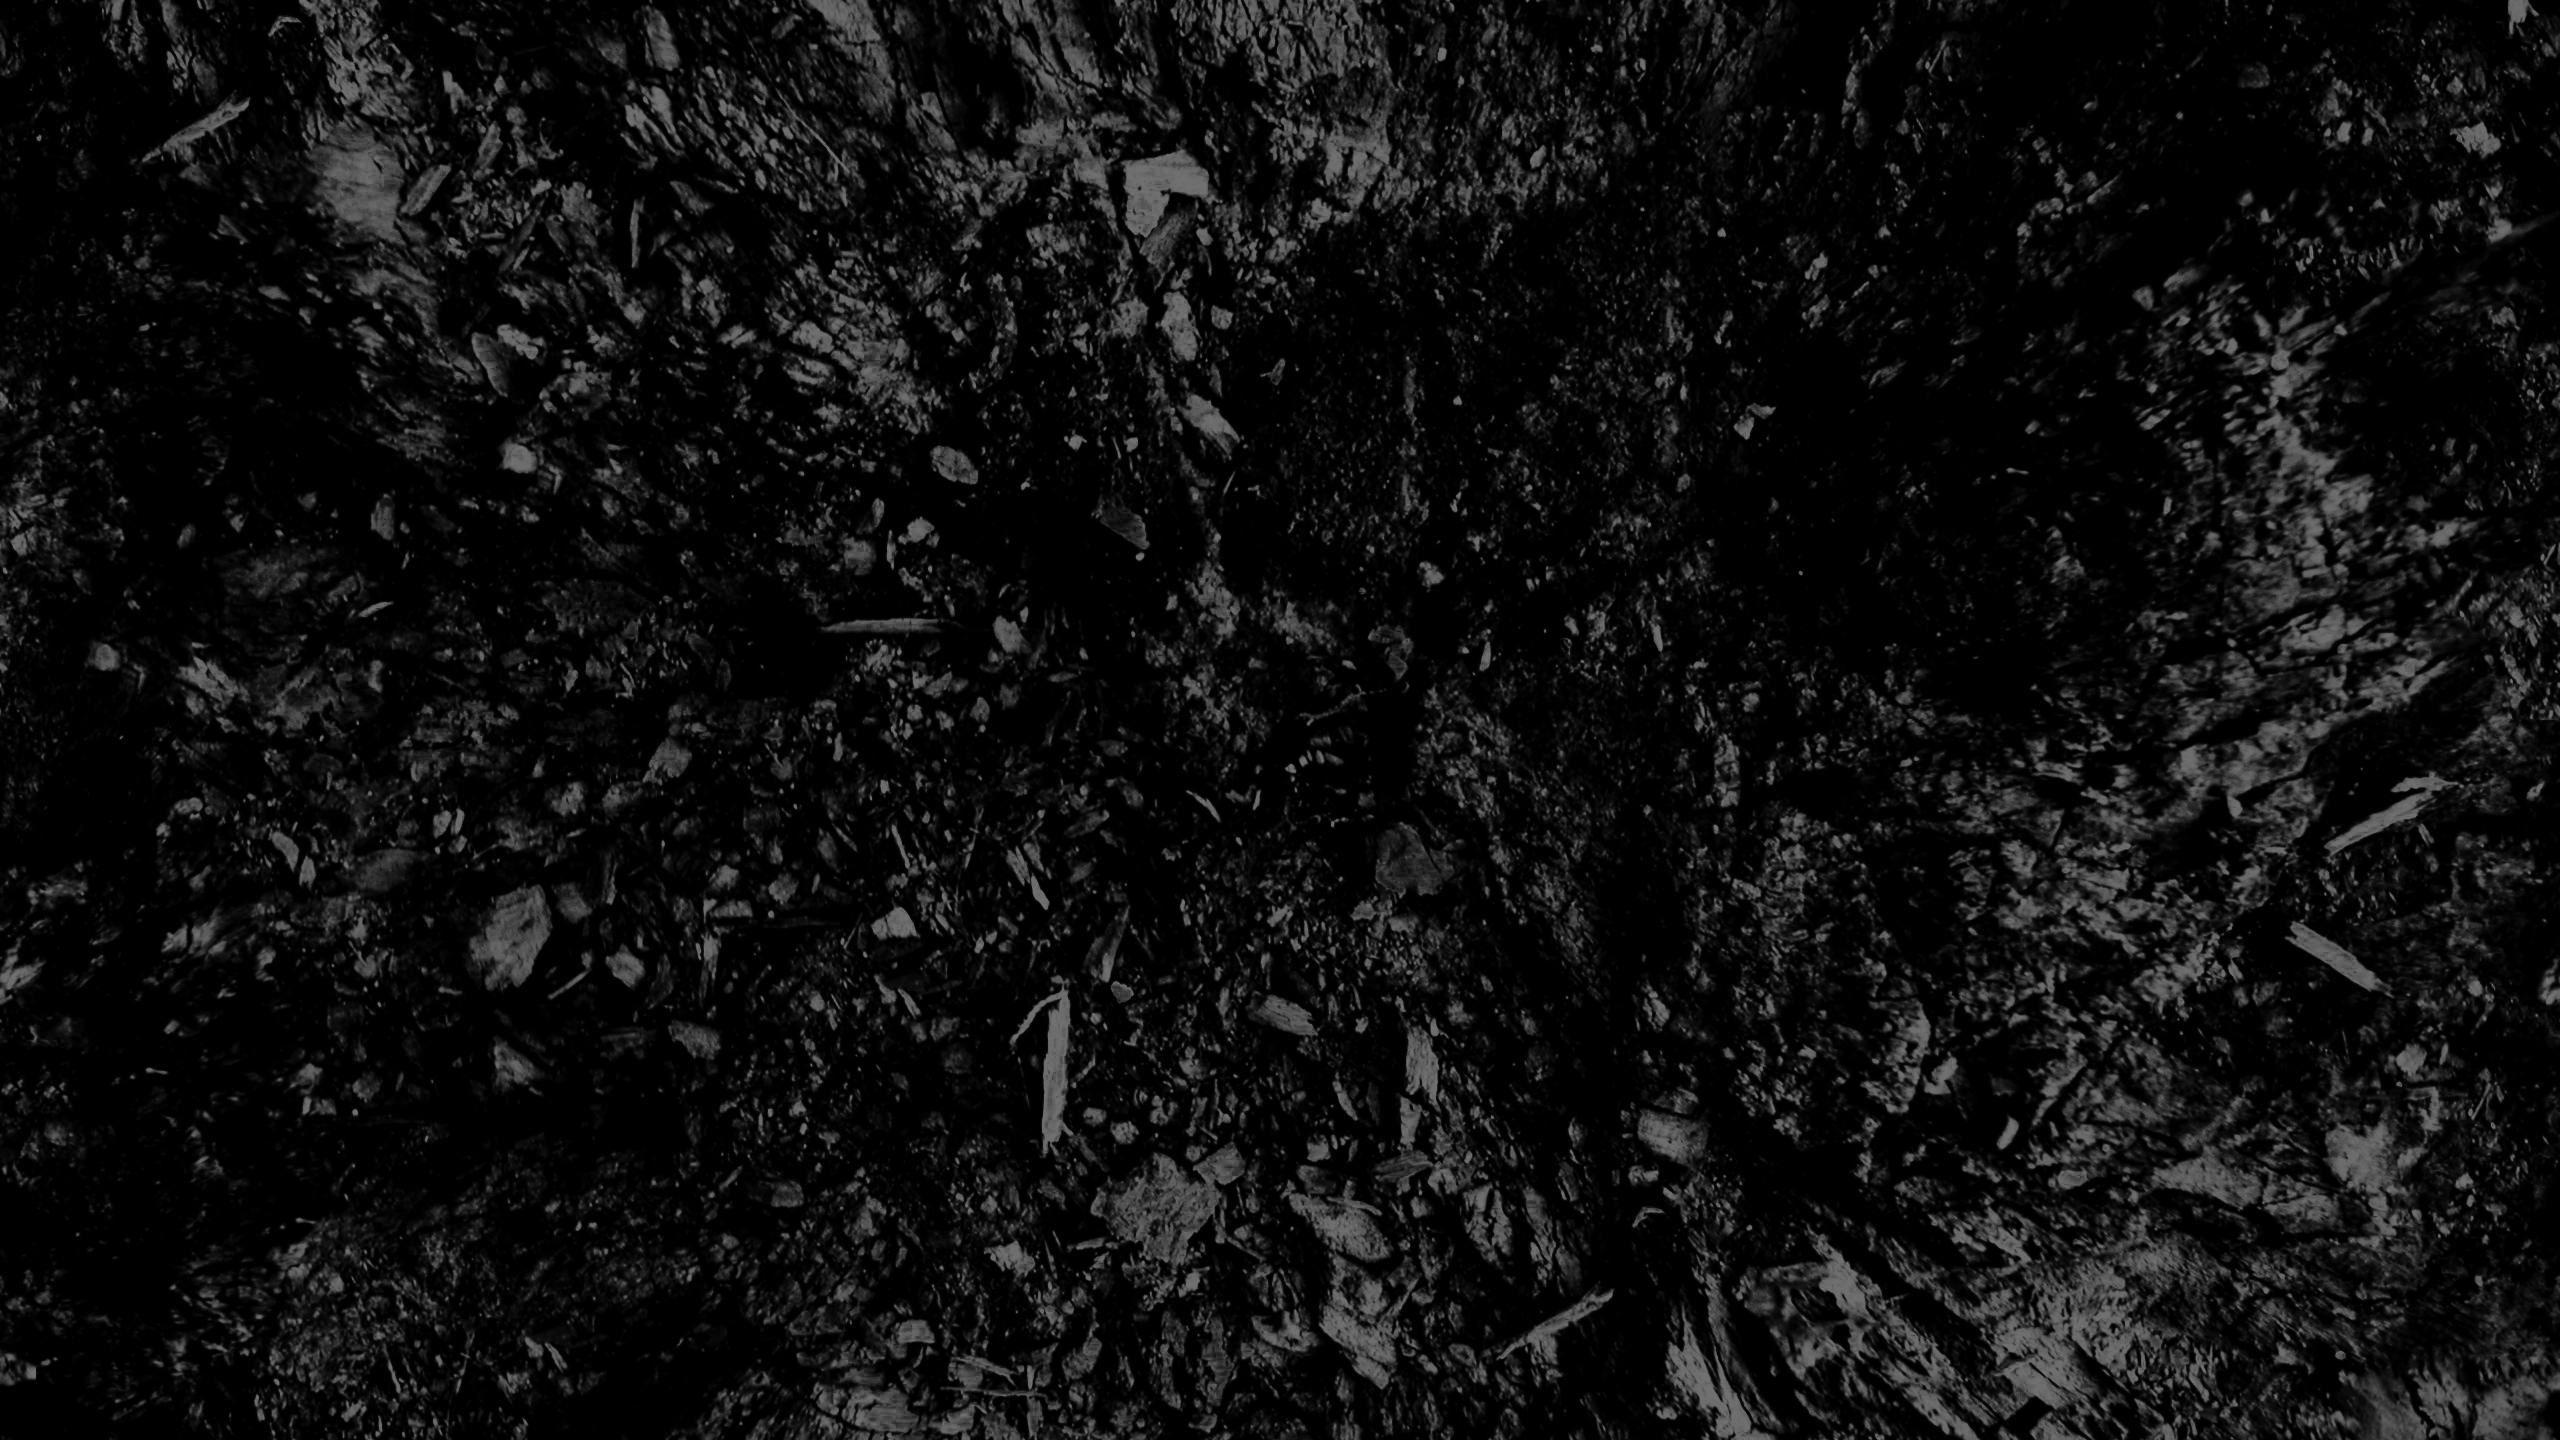 Download wallpaper 2560x1440 dark, black and white, abstract, black